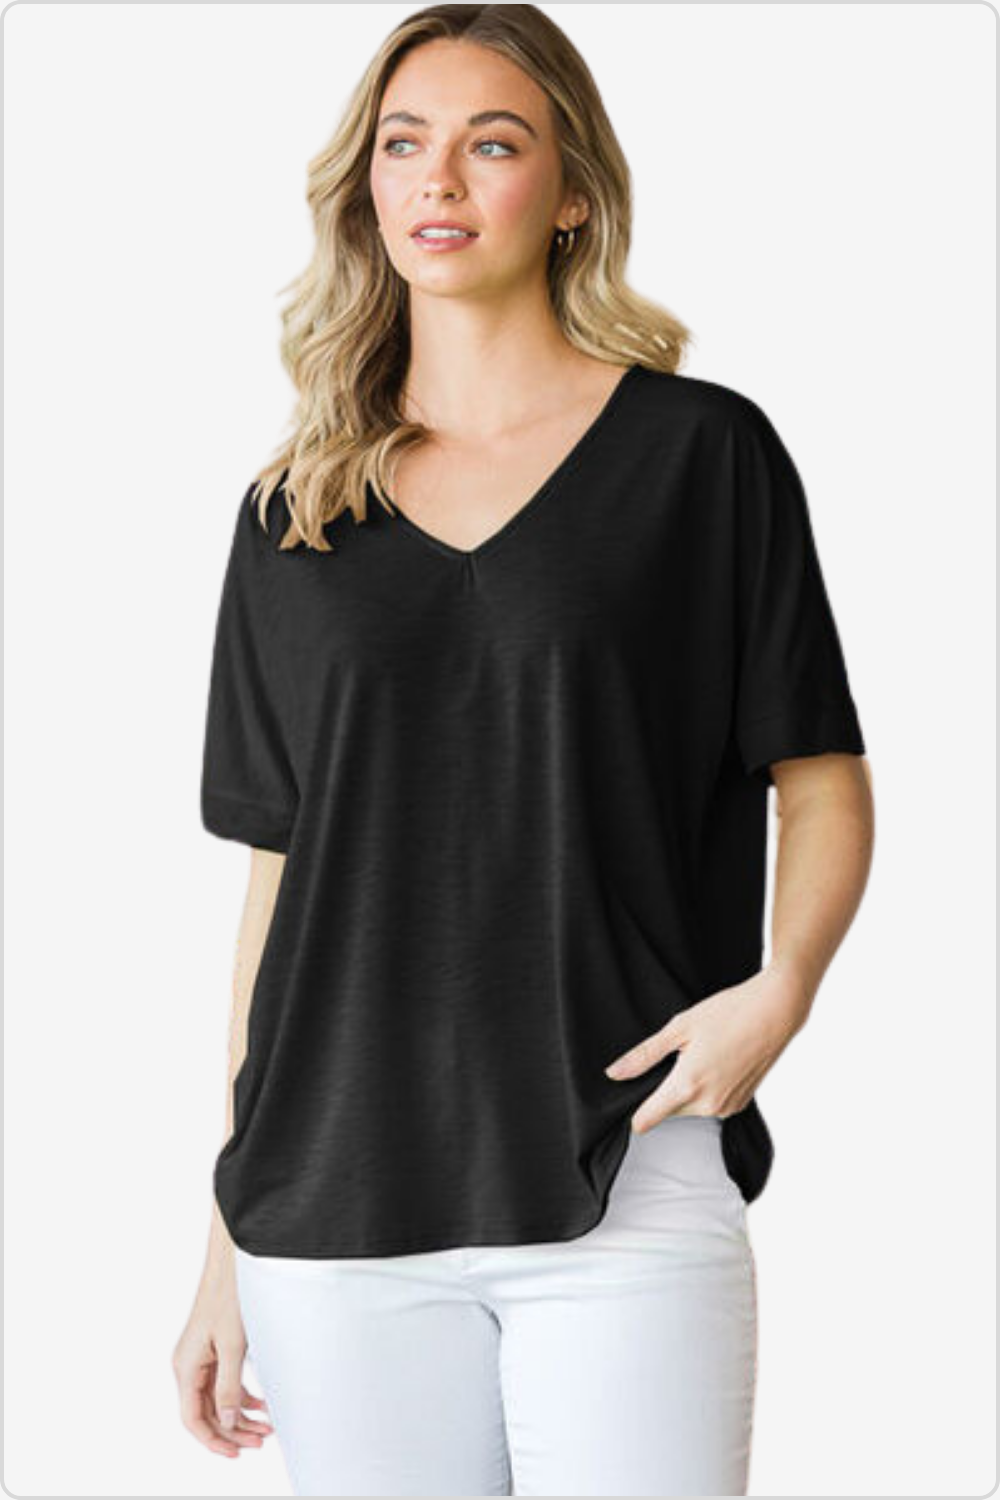 Fashionable model in Classic V-Neck Short Sleeve Tee, front view.